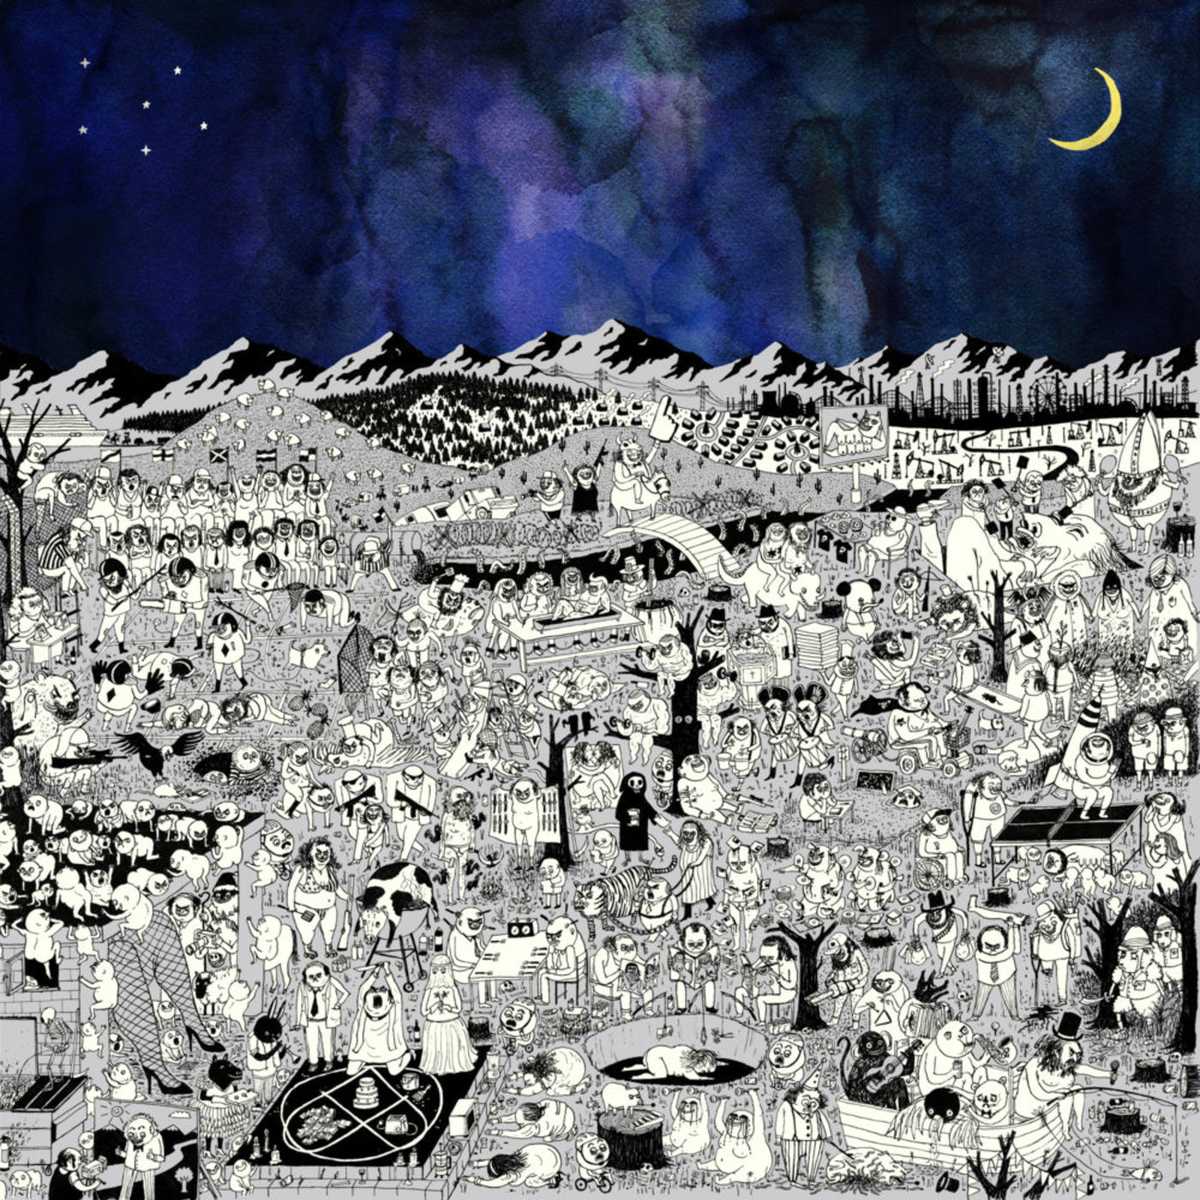 Father John Misty - Two Wildly Different Perspectives